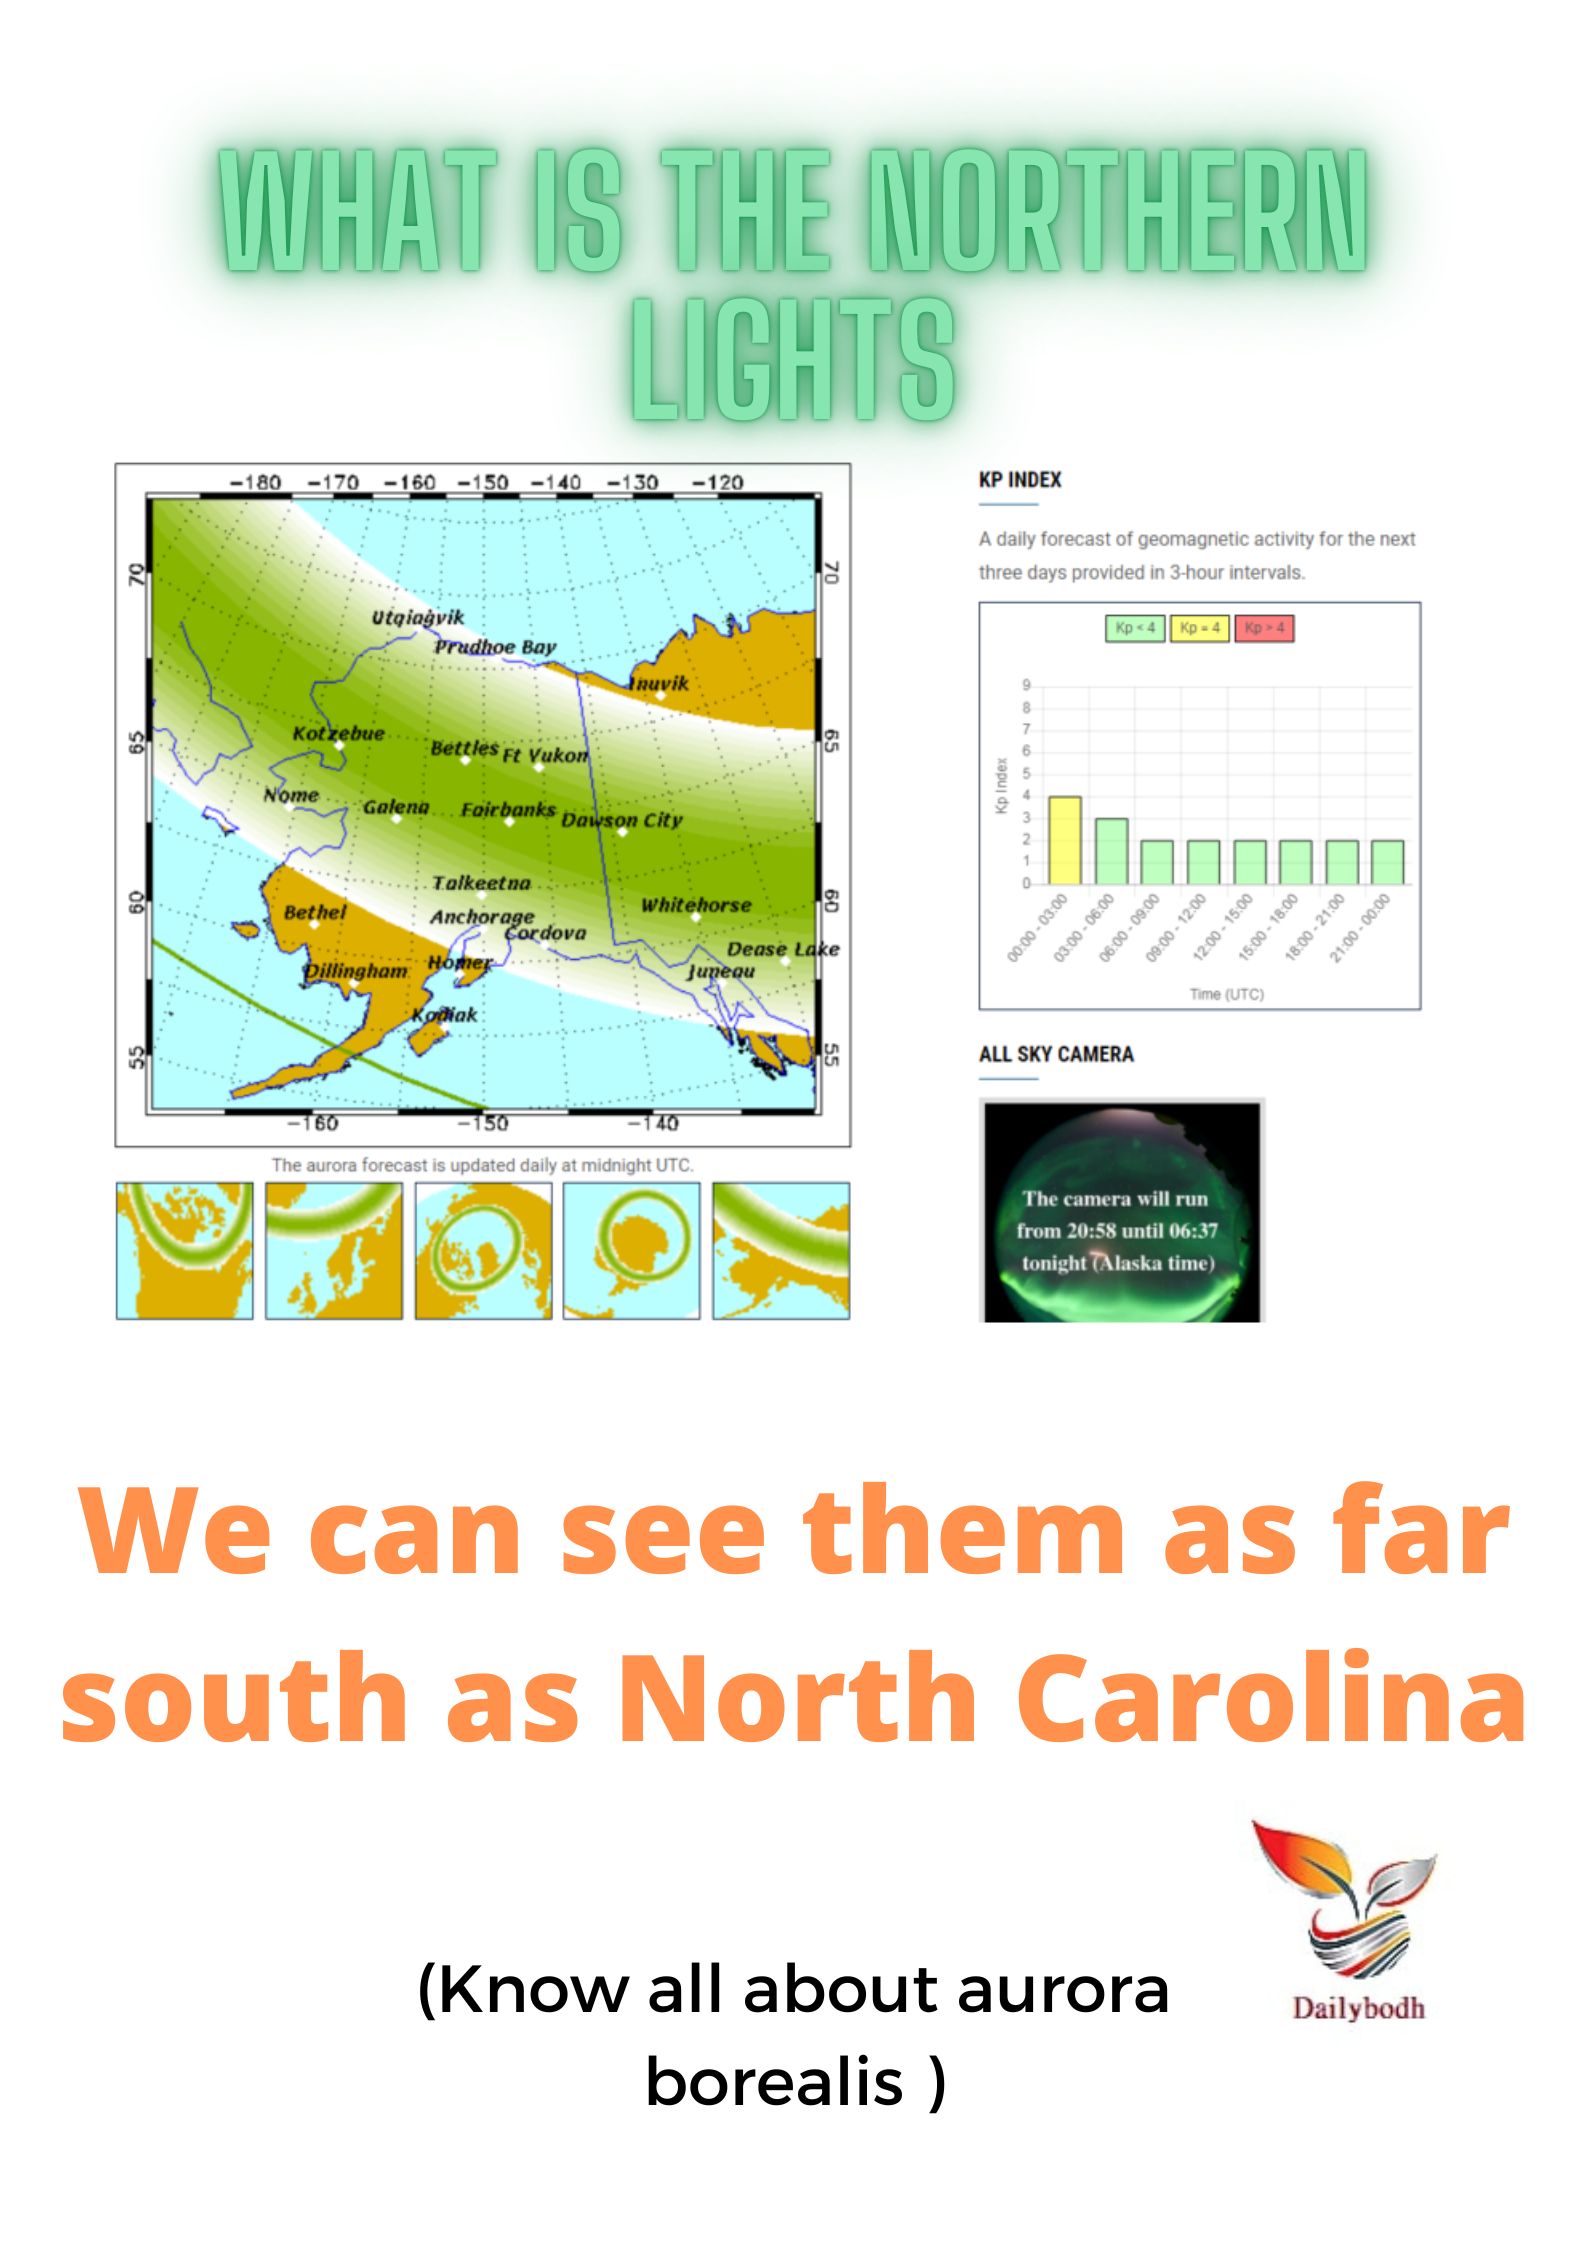 We can see them as far south as North Carolina (What is the Northern Lights)